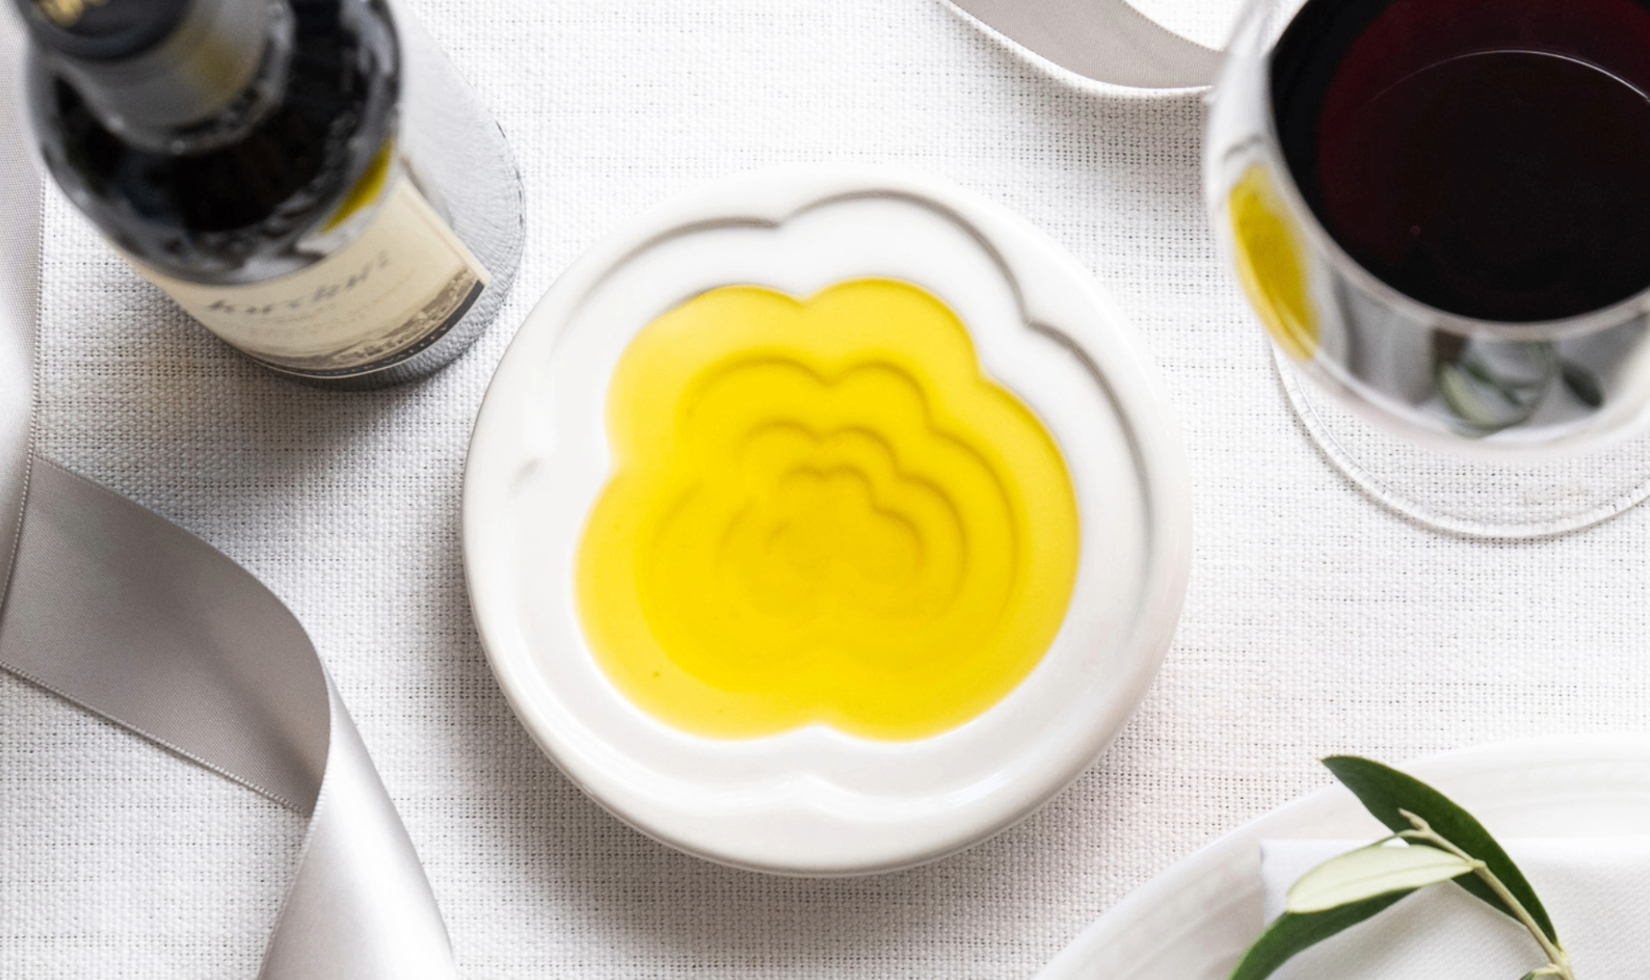 terraced dish filled with olive oil on table with white tablecloth